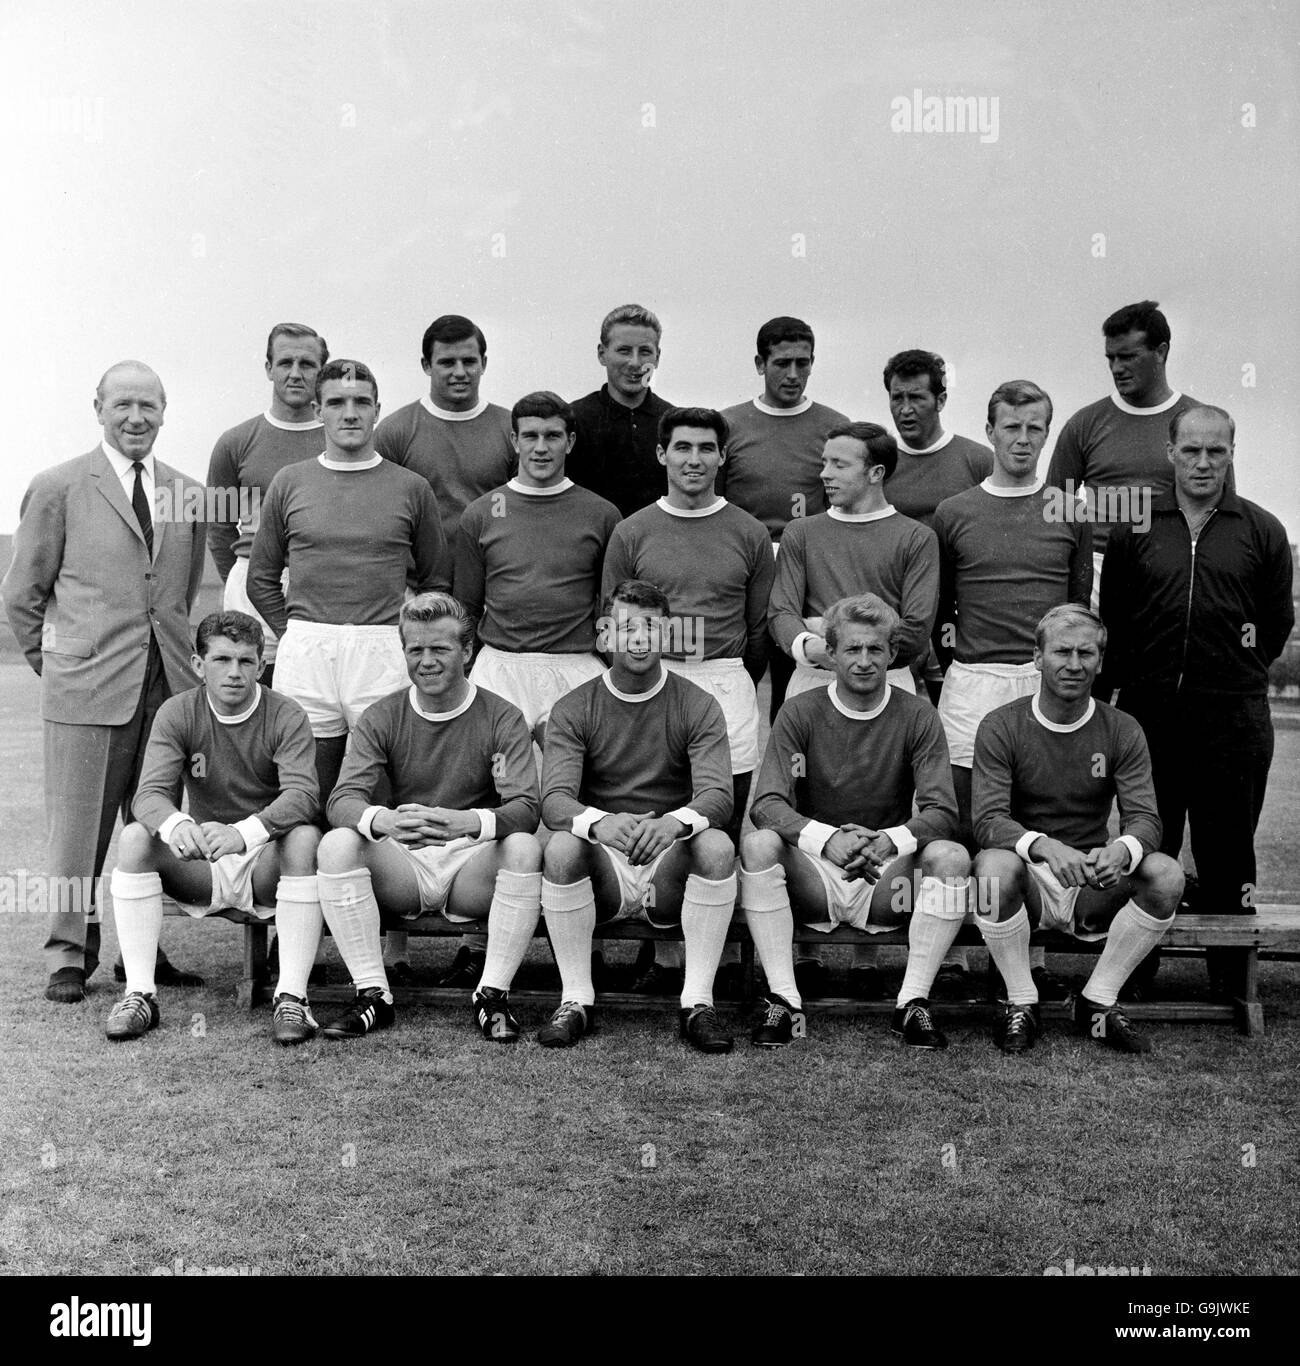 Manchester United team group: (back row, l-r) Maurice Setters, Jimmy Nicholson, David Gaskell, Shay Brennan, Mark Pearson, Noel Cantwell (middle row, l-r) manager Matt Busby, Bill Foulkes, Sammy McMillan, Tony Dunne, Nobby Stiles, Nobby Lawton, trainer Jack Crompton (front row, l-r) Johnny Giles, Albert Quixall, David Herd, Denis Law, Bobby Charlton Stock Photo